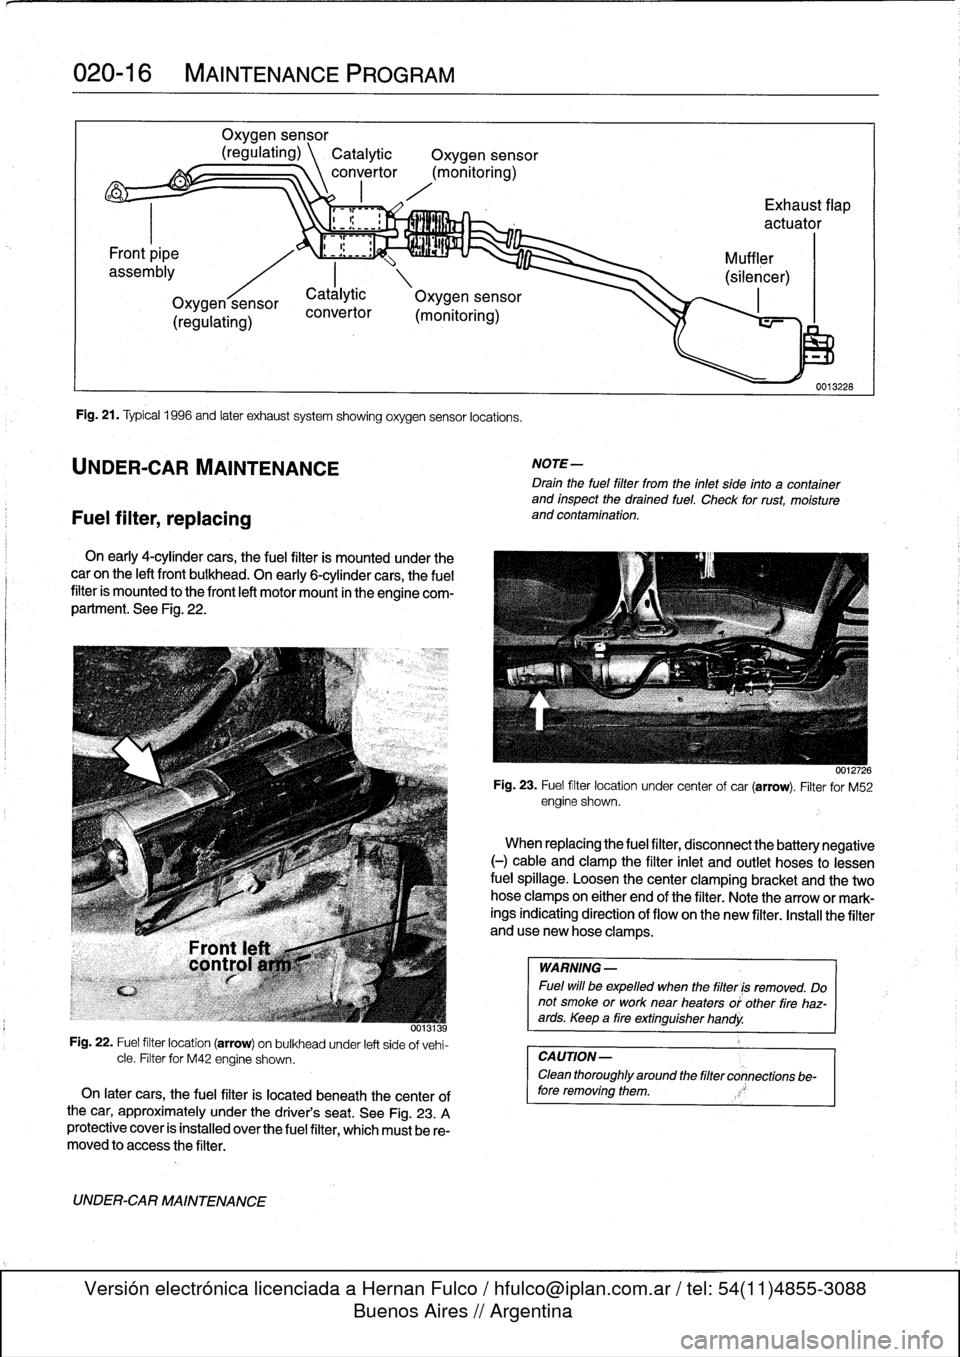 BMW M3 1995 E36 Workshop Manual 
020-
1
6

	

MAINTENANCE
PROGRAM

Fuel
filter,
replacing

Oxygen
sensor

(regulating)
\
Catalytic

	

Oxygen
sensor
convertor
(monitoring)

Fig
.
21
.
Typical
1996
and
later
exhaust
system
showing
ox